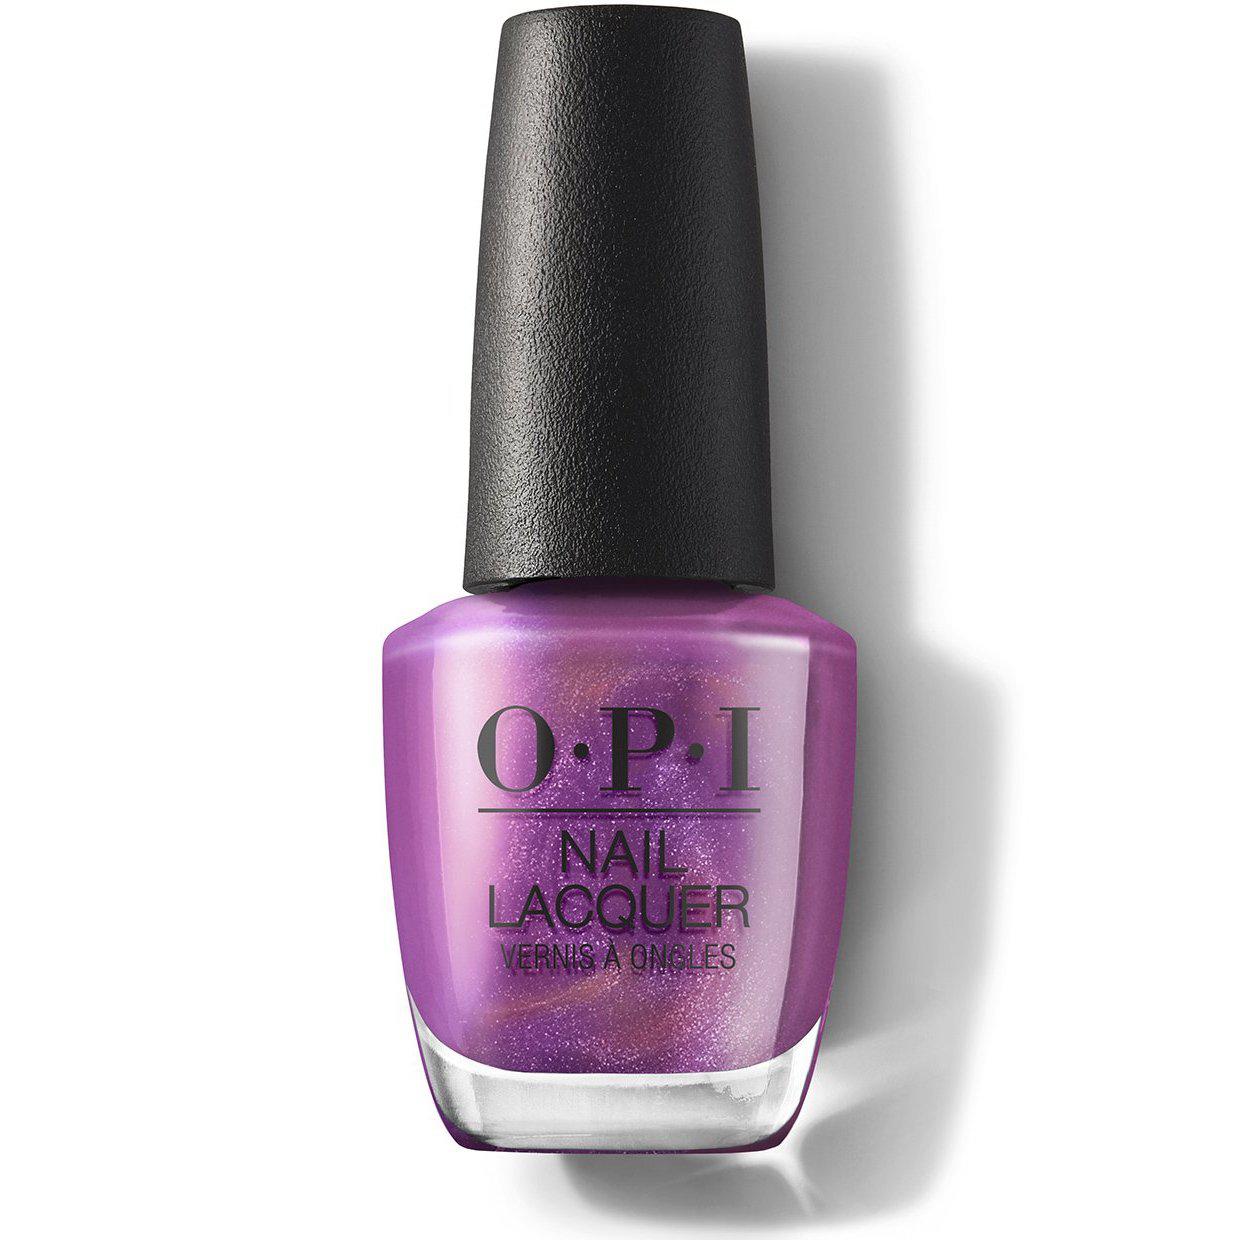 OPI nail lacquer color wheel is spinning